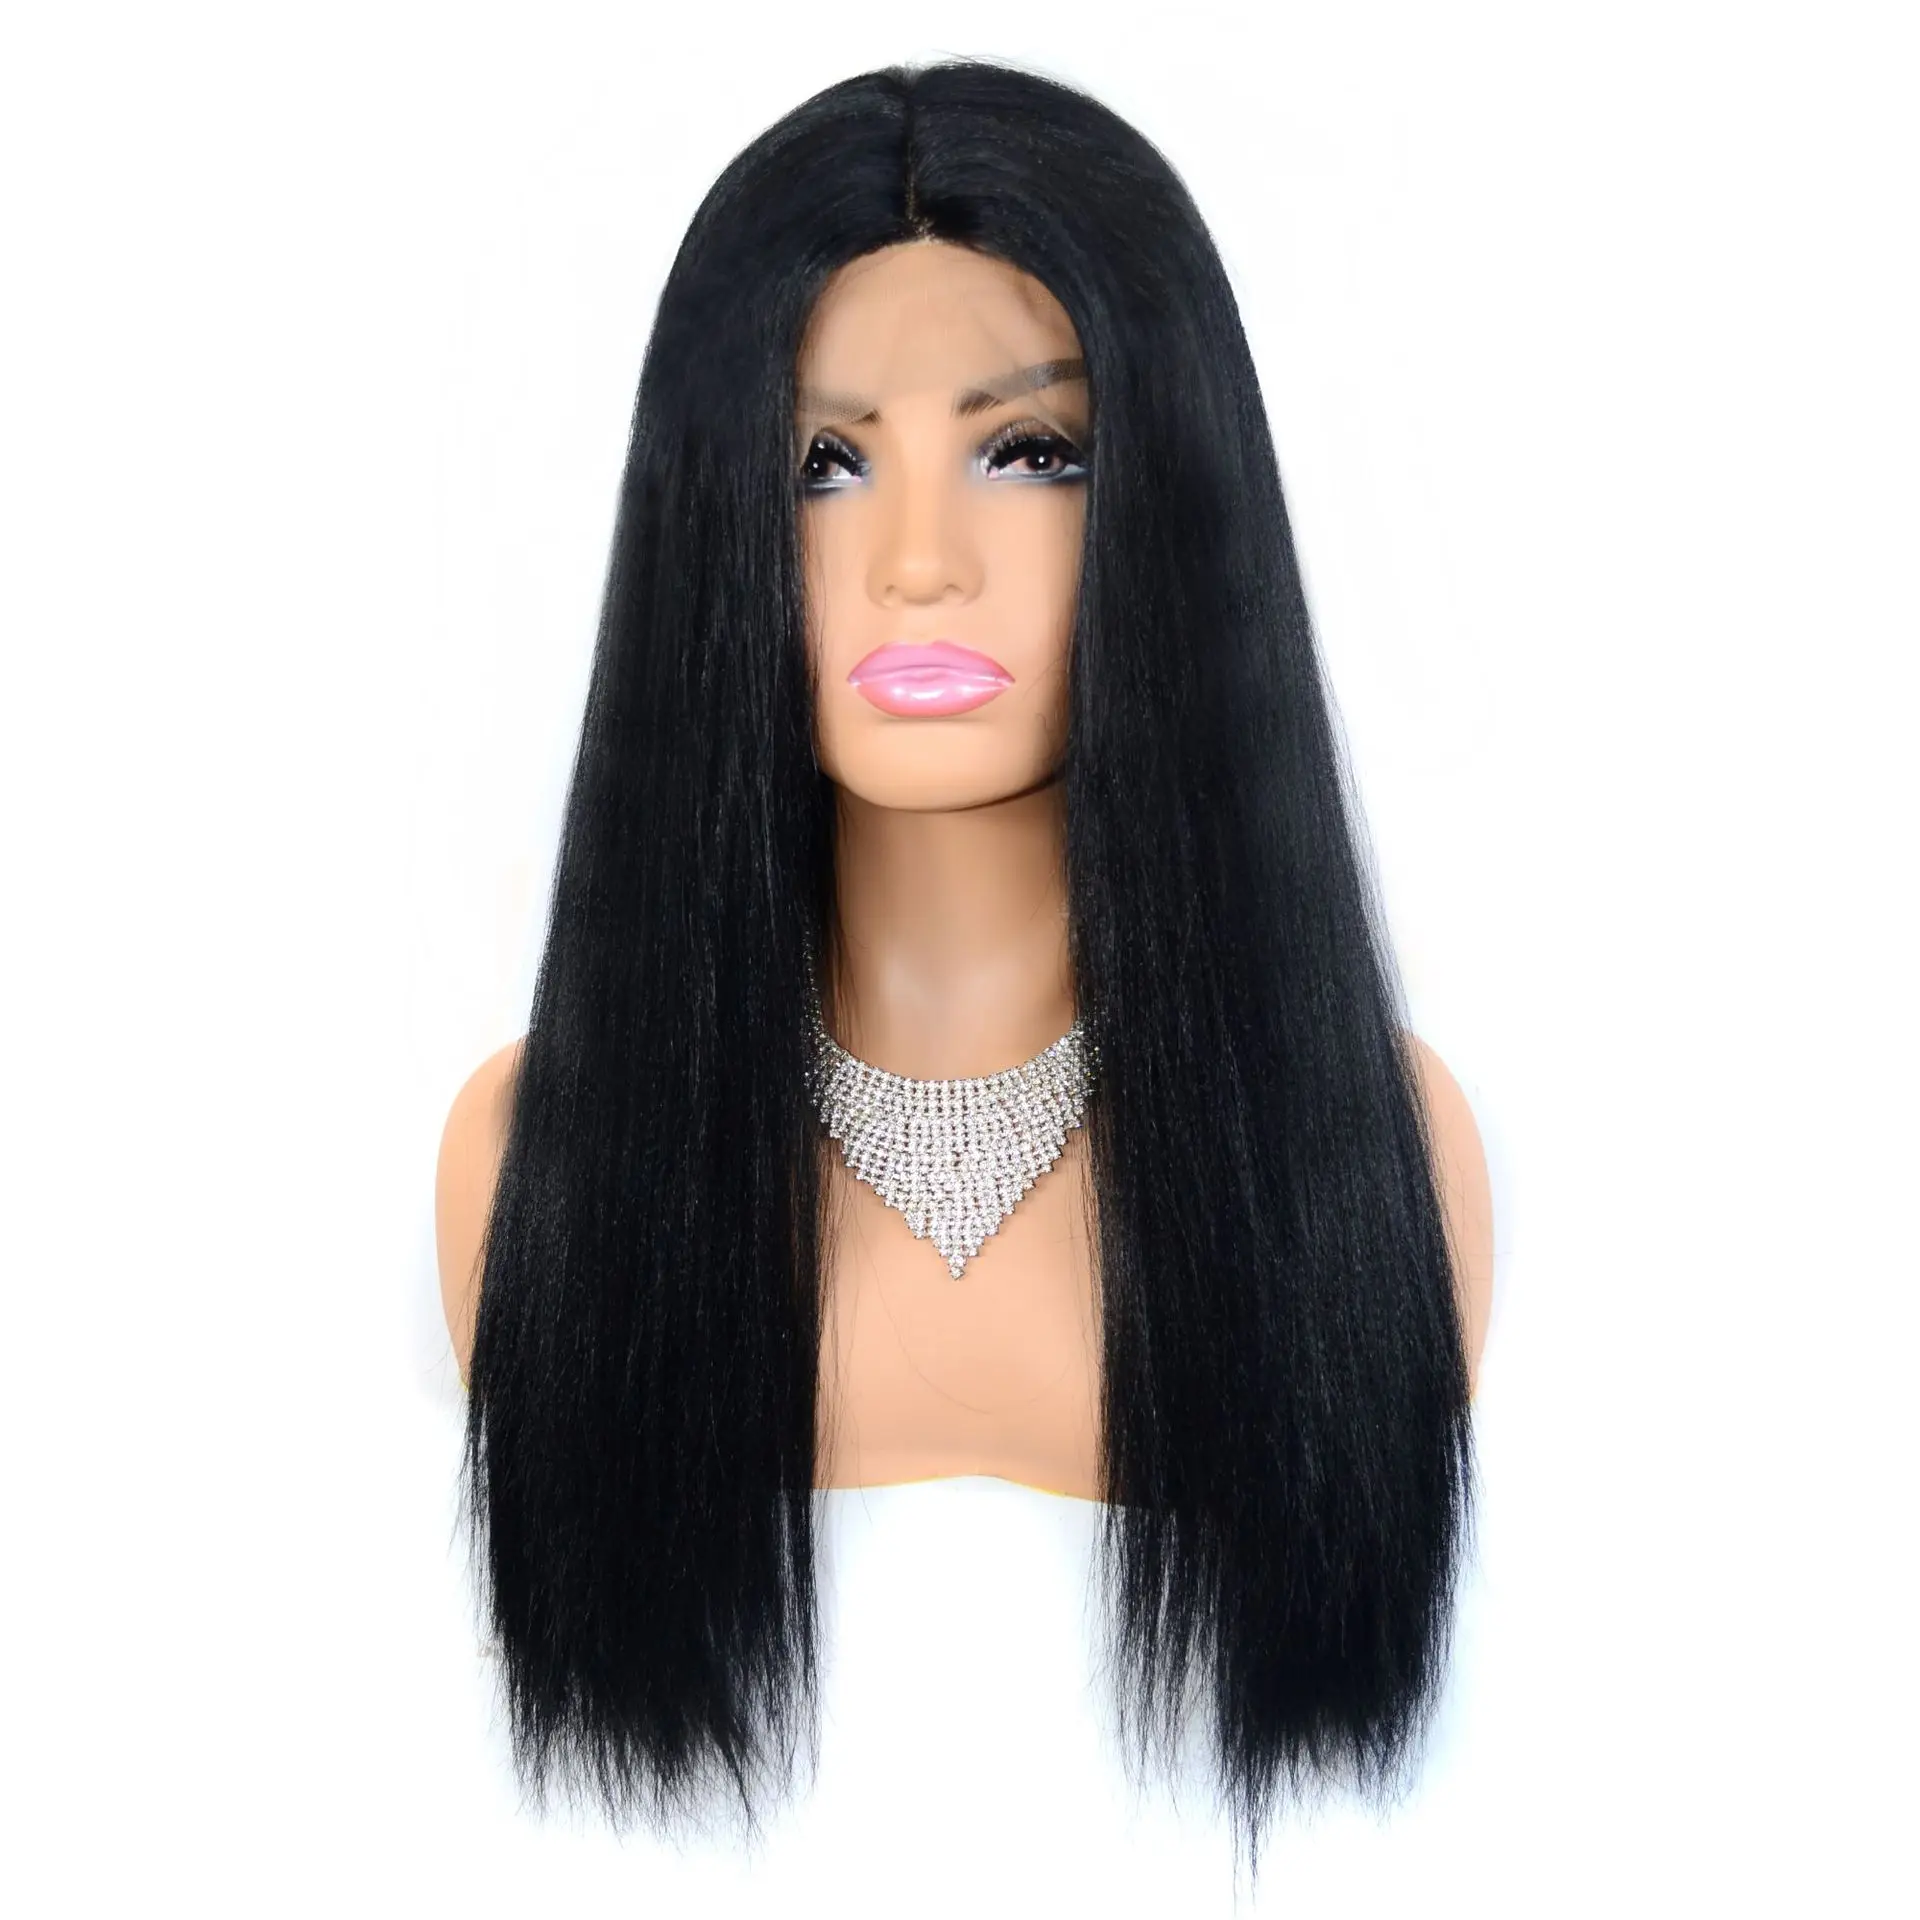 

YAKI Silk T Front Lace Chemical Fiber Wig Cover Slightly Fluffy Middle Black Wigs